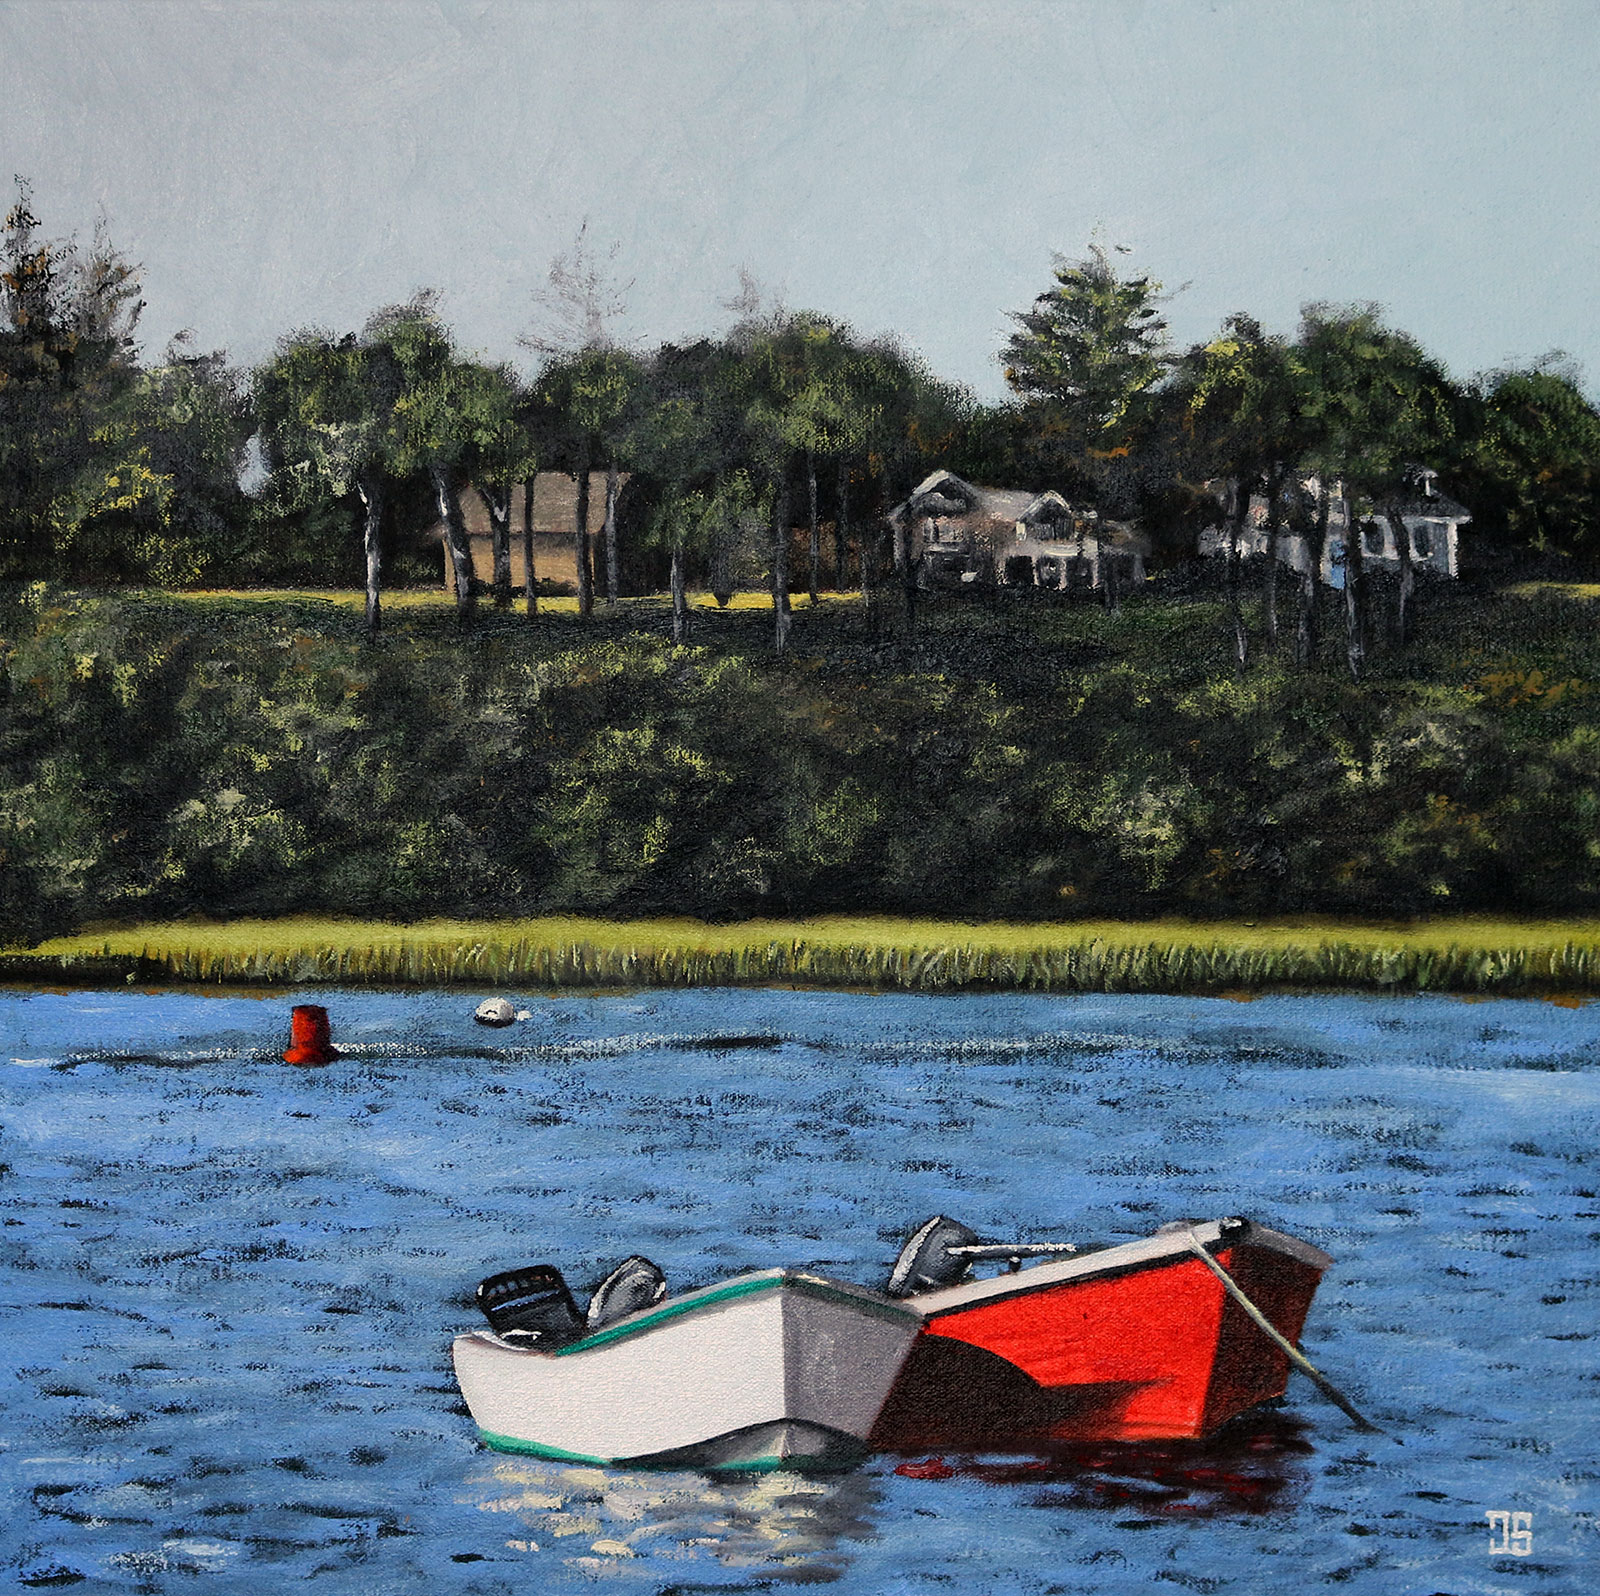 Oil painting "Two Boats in Chatham" by Jeffrey Dale Starr